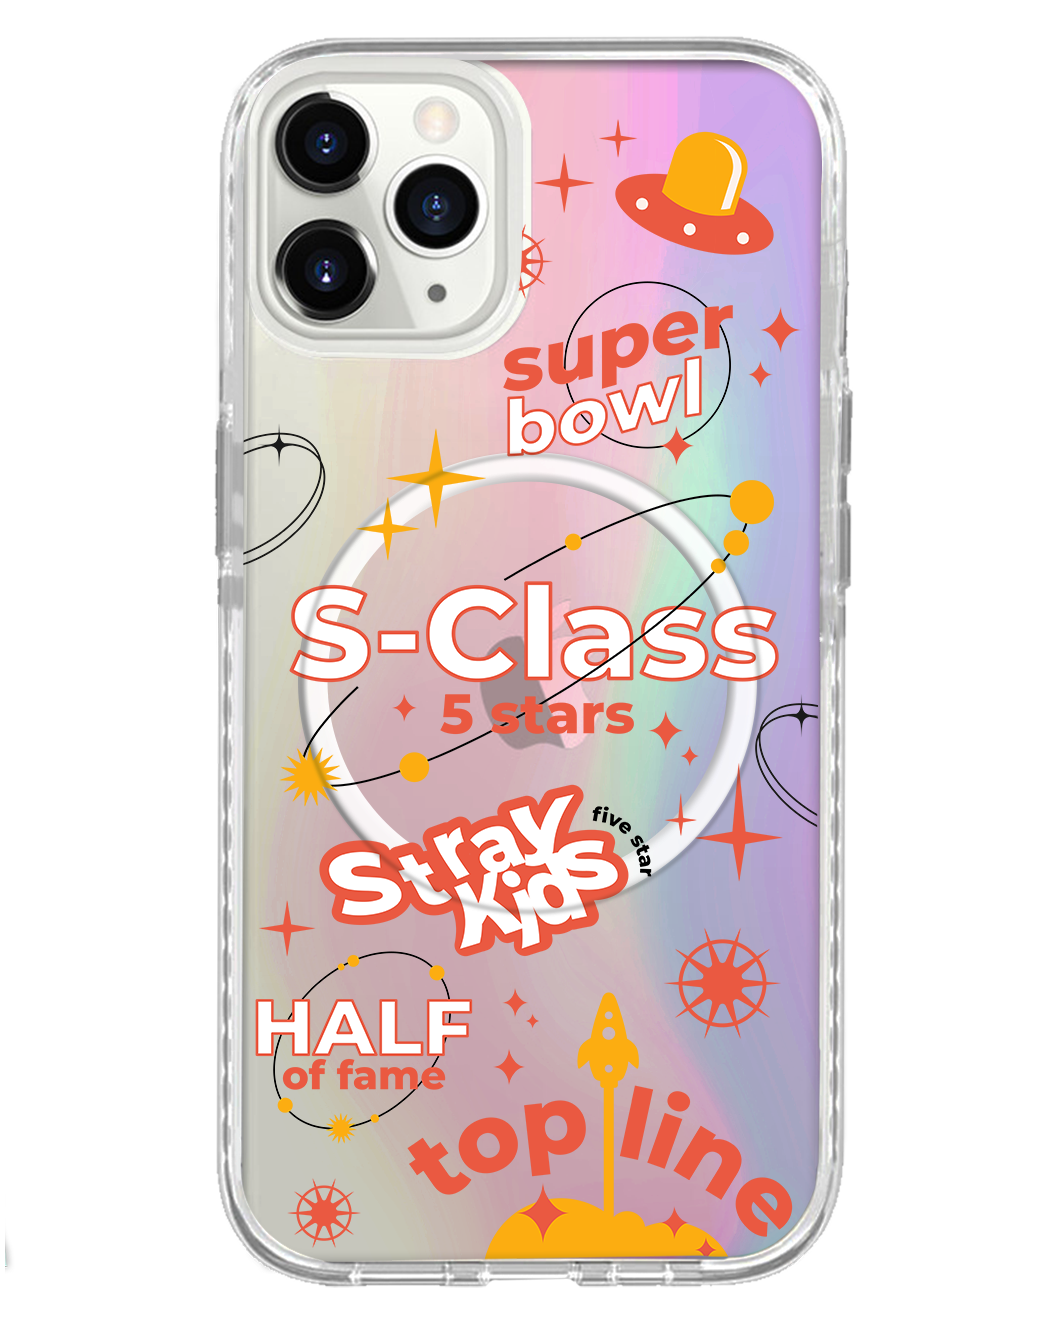 iPhone Rearguard Holo - Stray Kids 5 Star